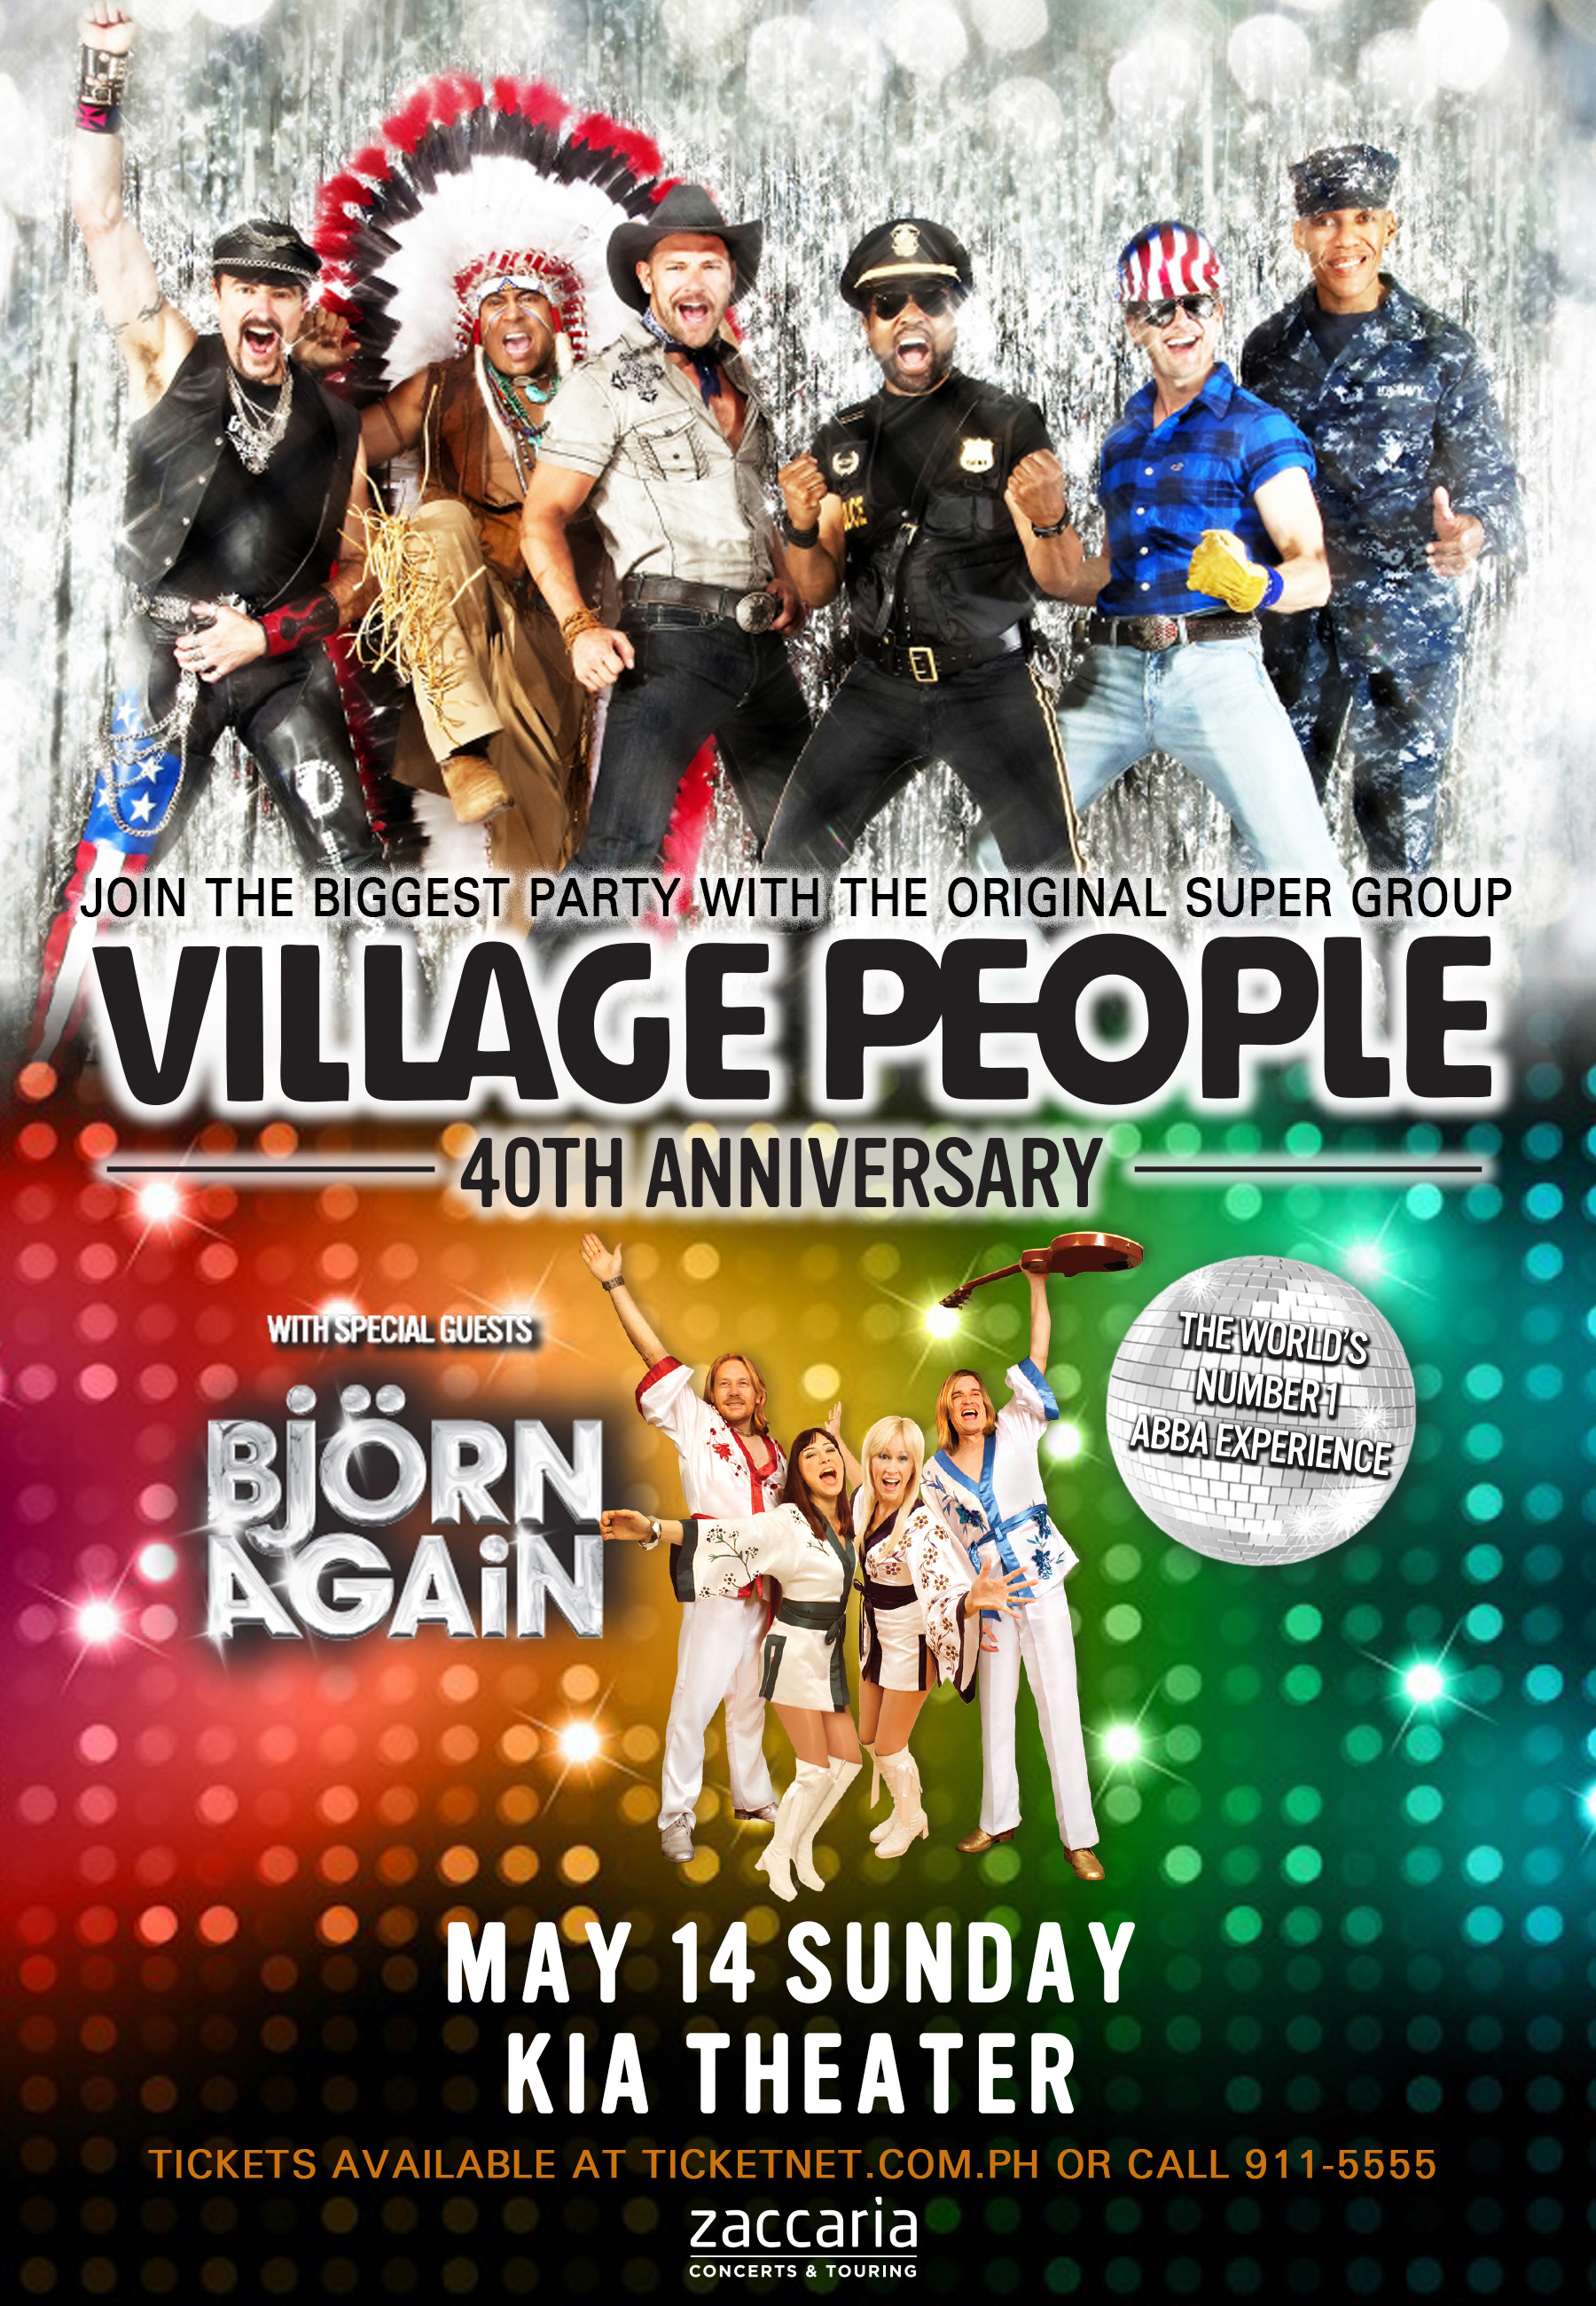 Village People Coming to Manila for Their 40th Anniversary